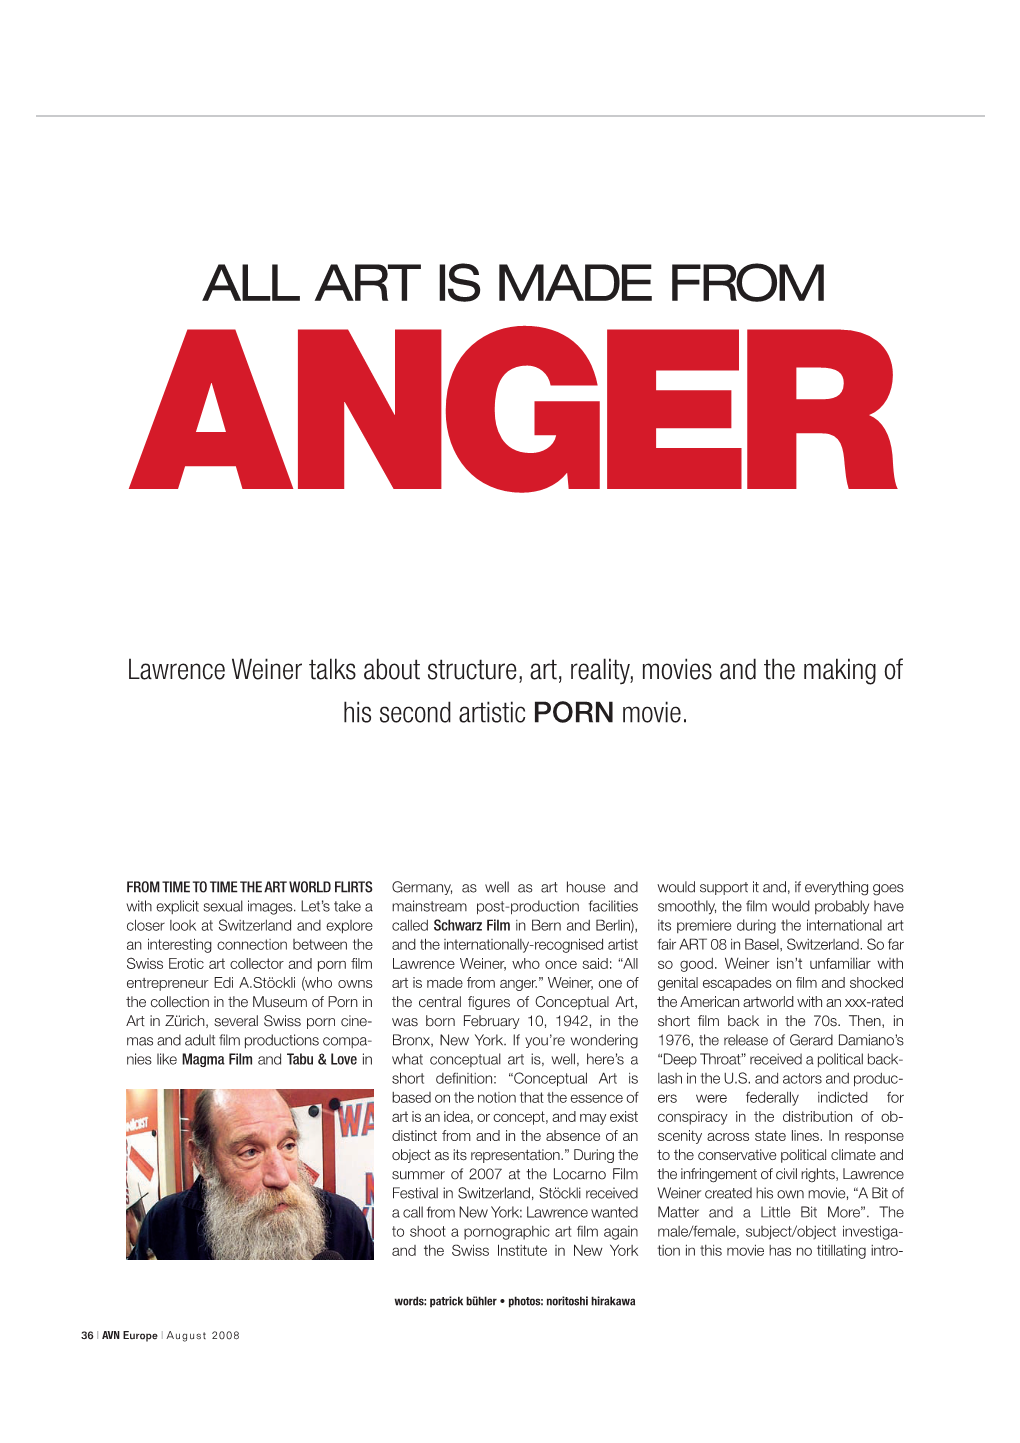 Art Is Made from Anger